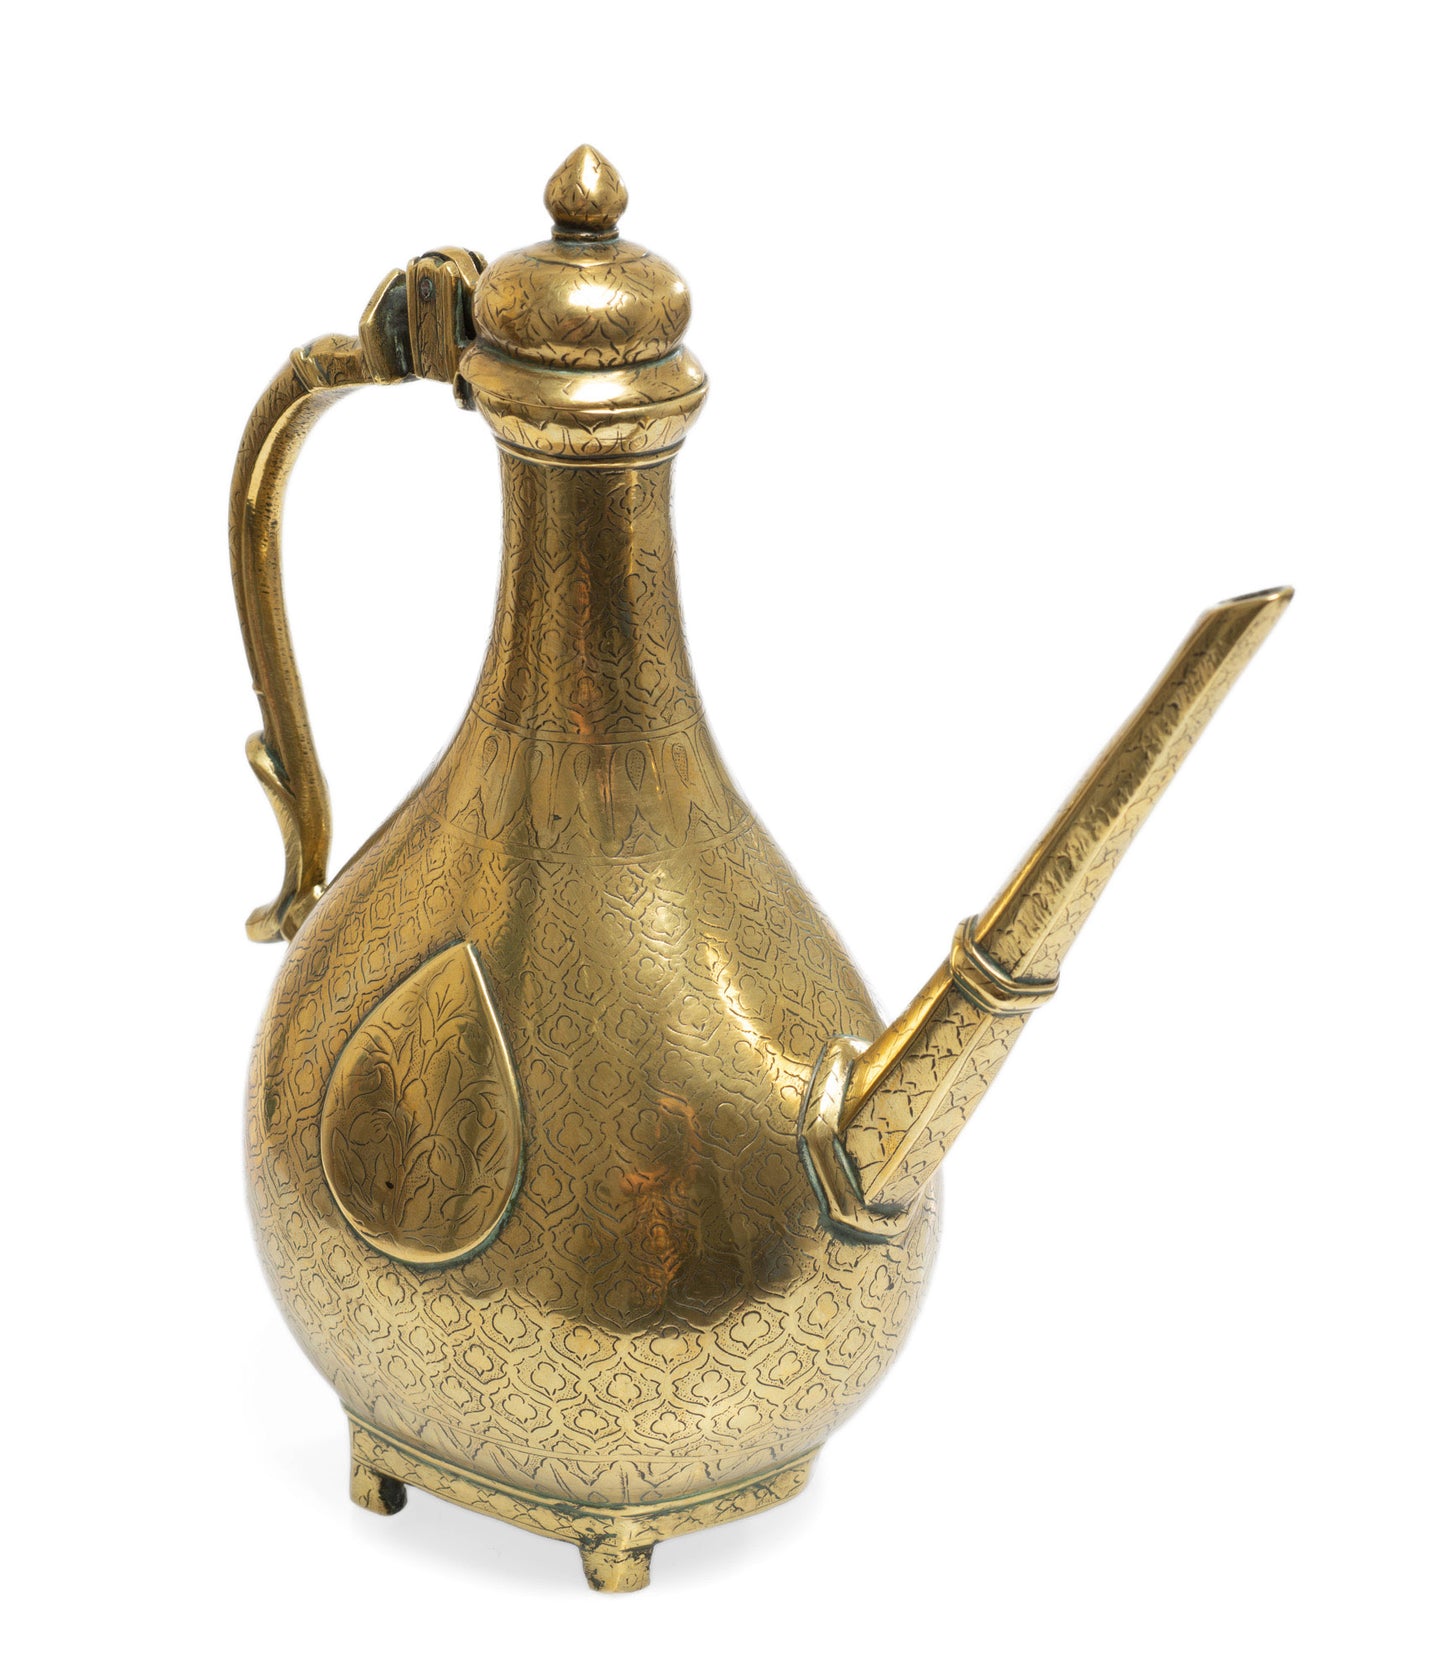 Antique Mughal Indian Islamic Brass Aftaba Ewer Chased Leaves - 18th Century (Code 2653)